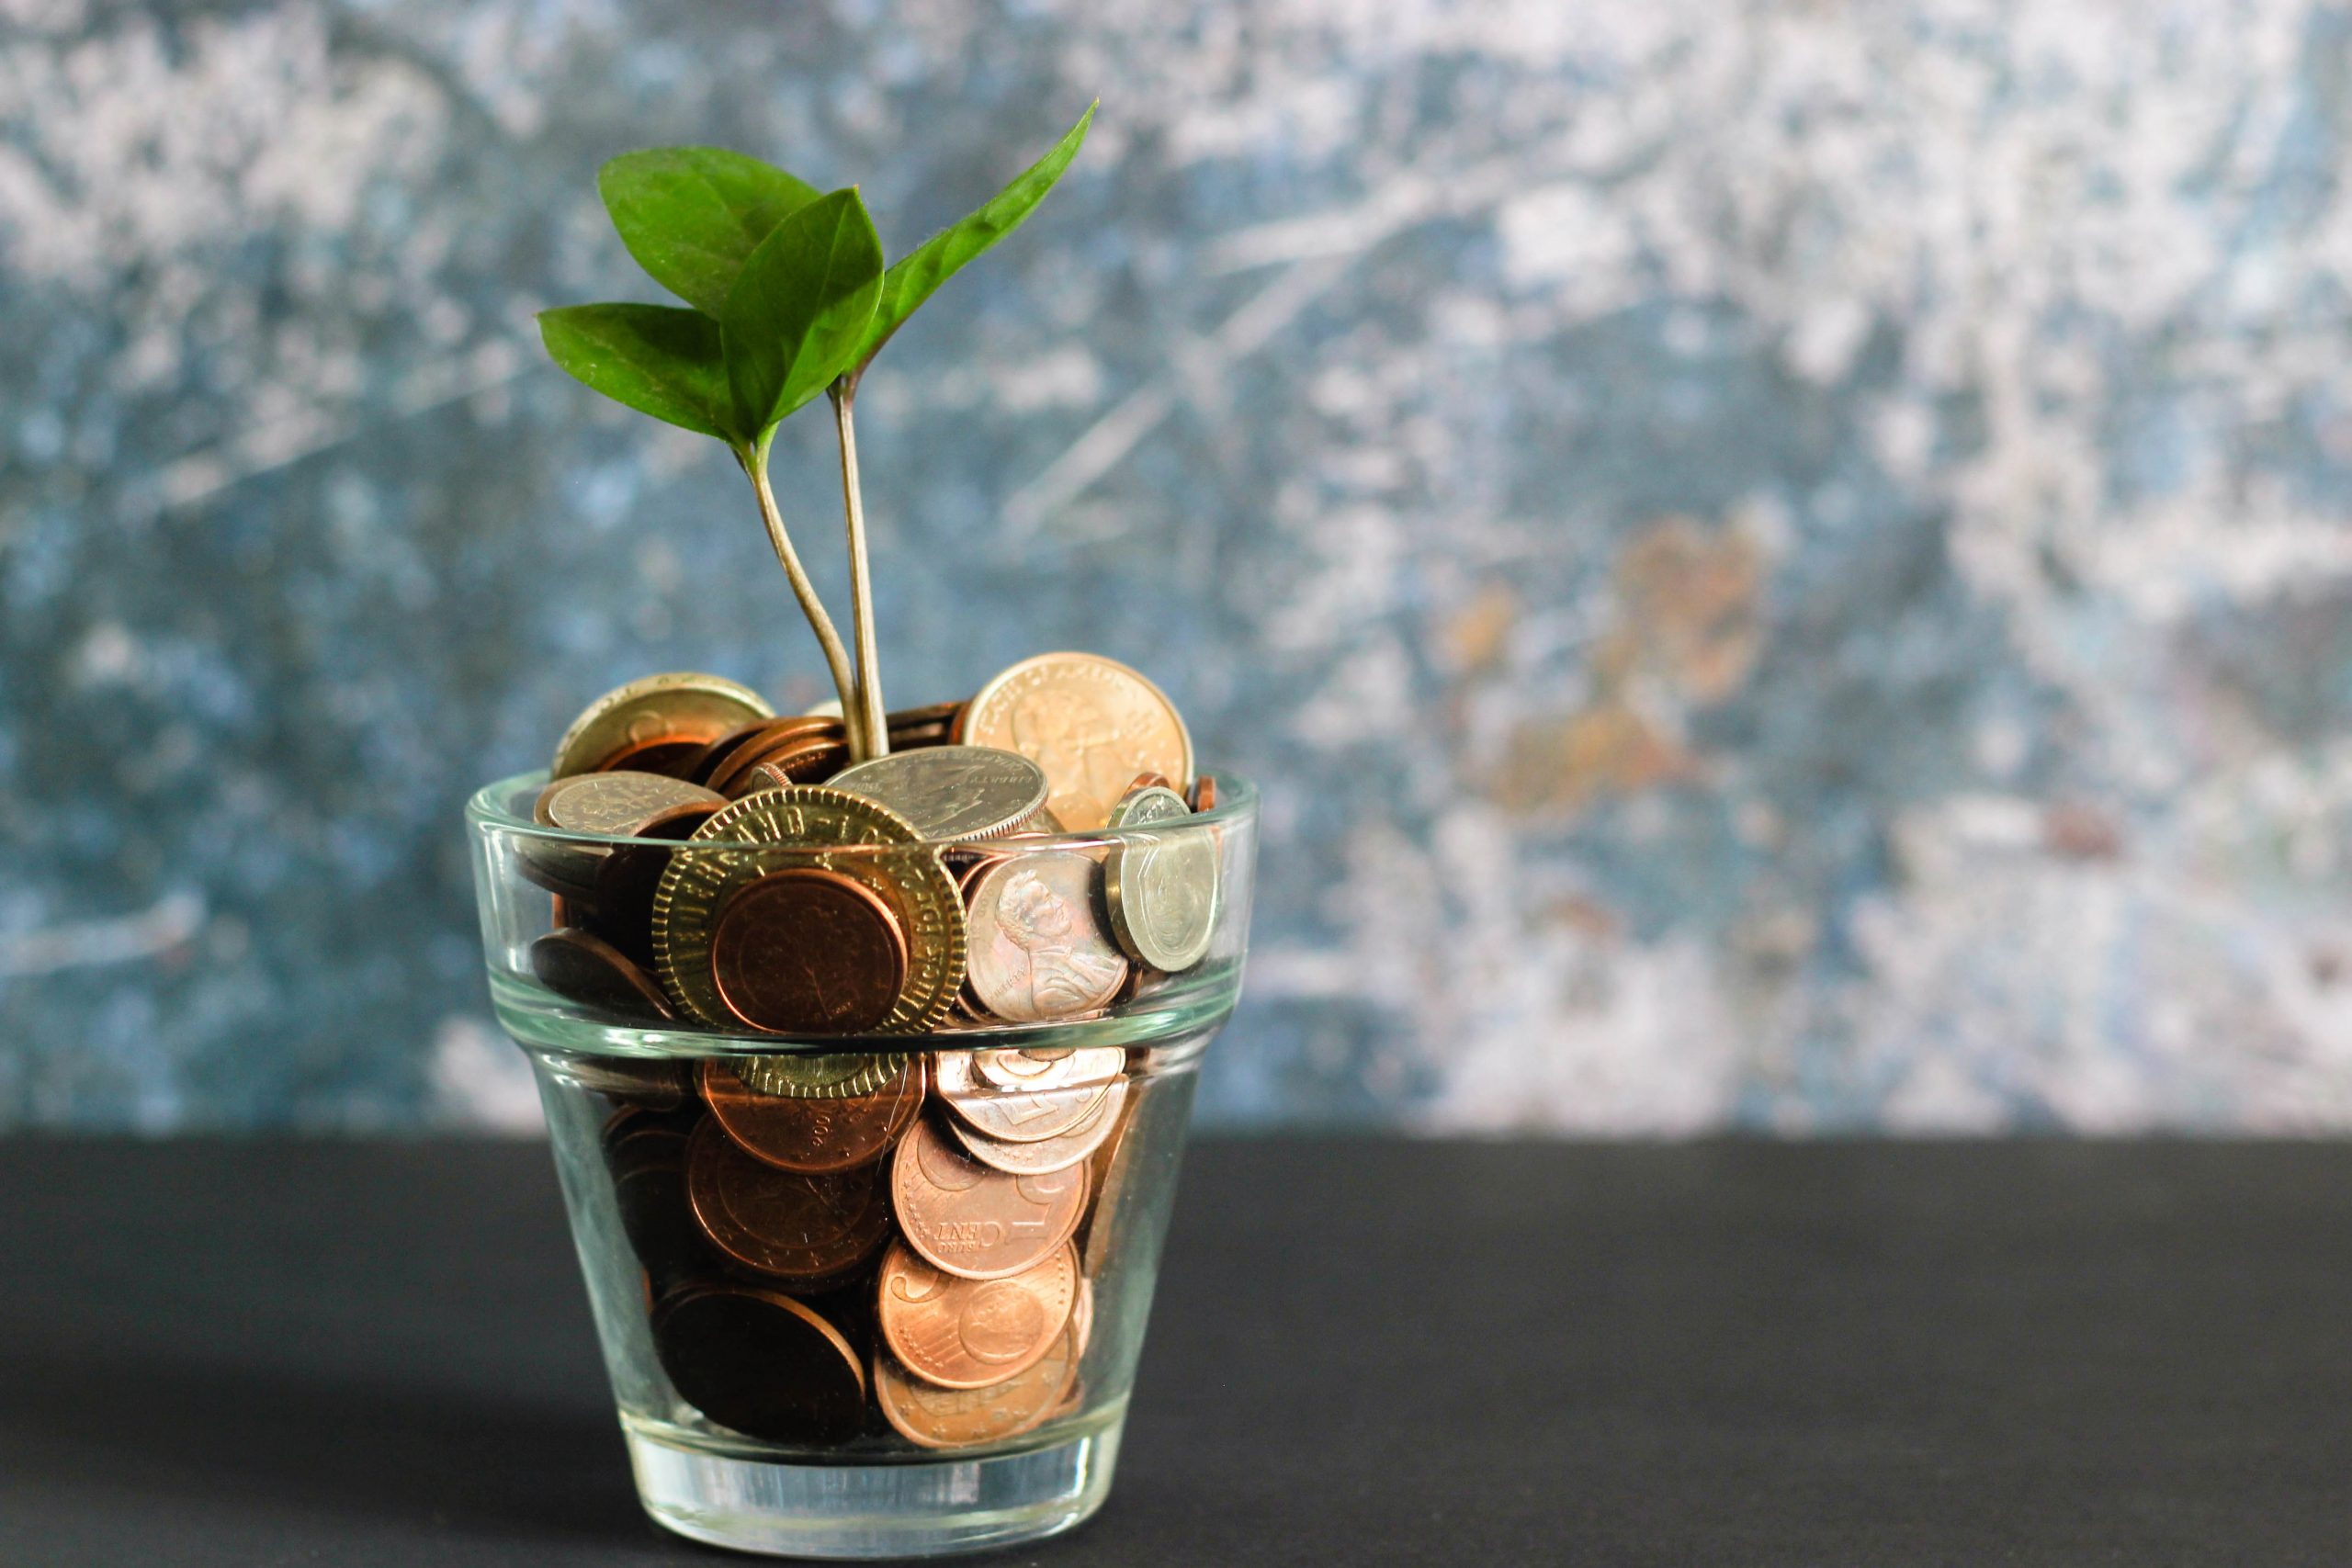 A glass filled with money and a plant growing from it